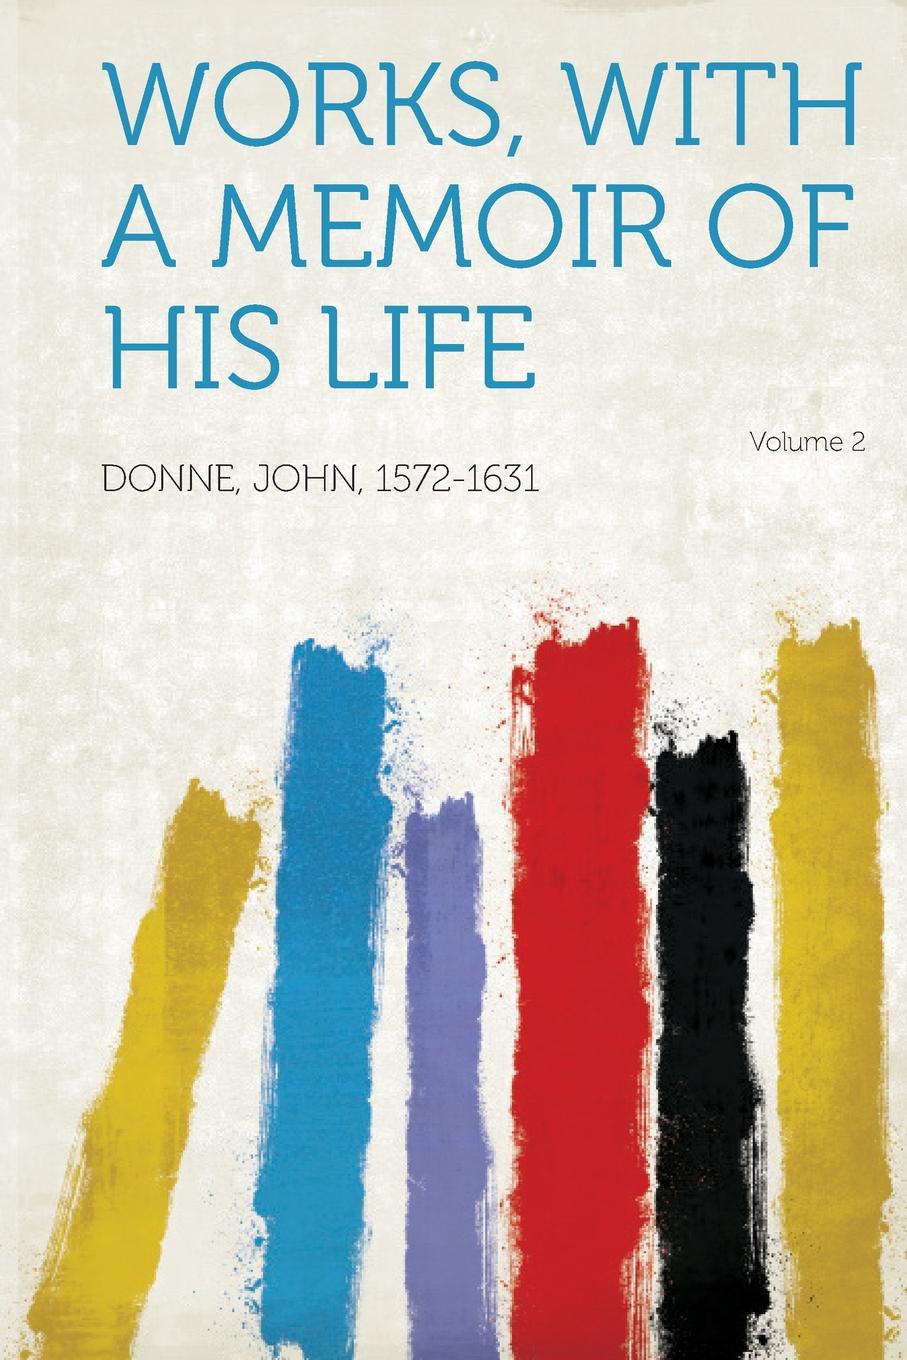 Works, with a Memoir of His Life Volume 2